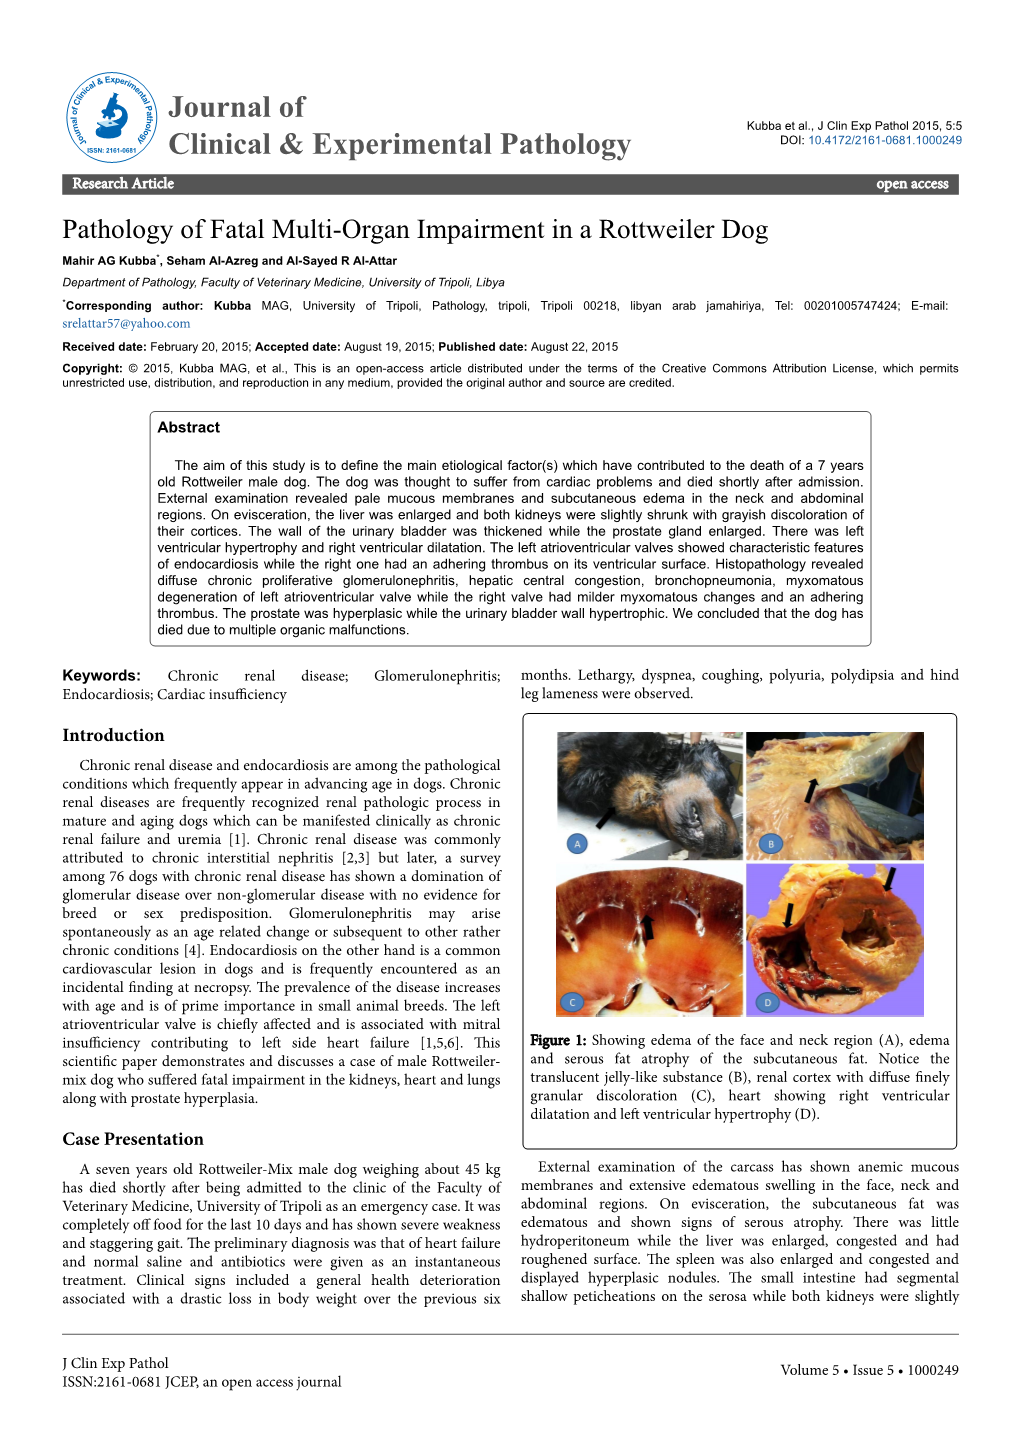 Pathology of Fatal Multi-Organ Impairment in a Rottweiler